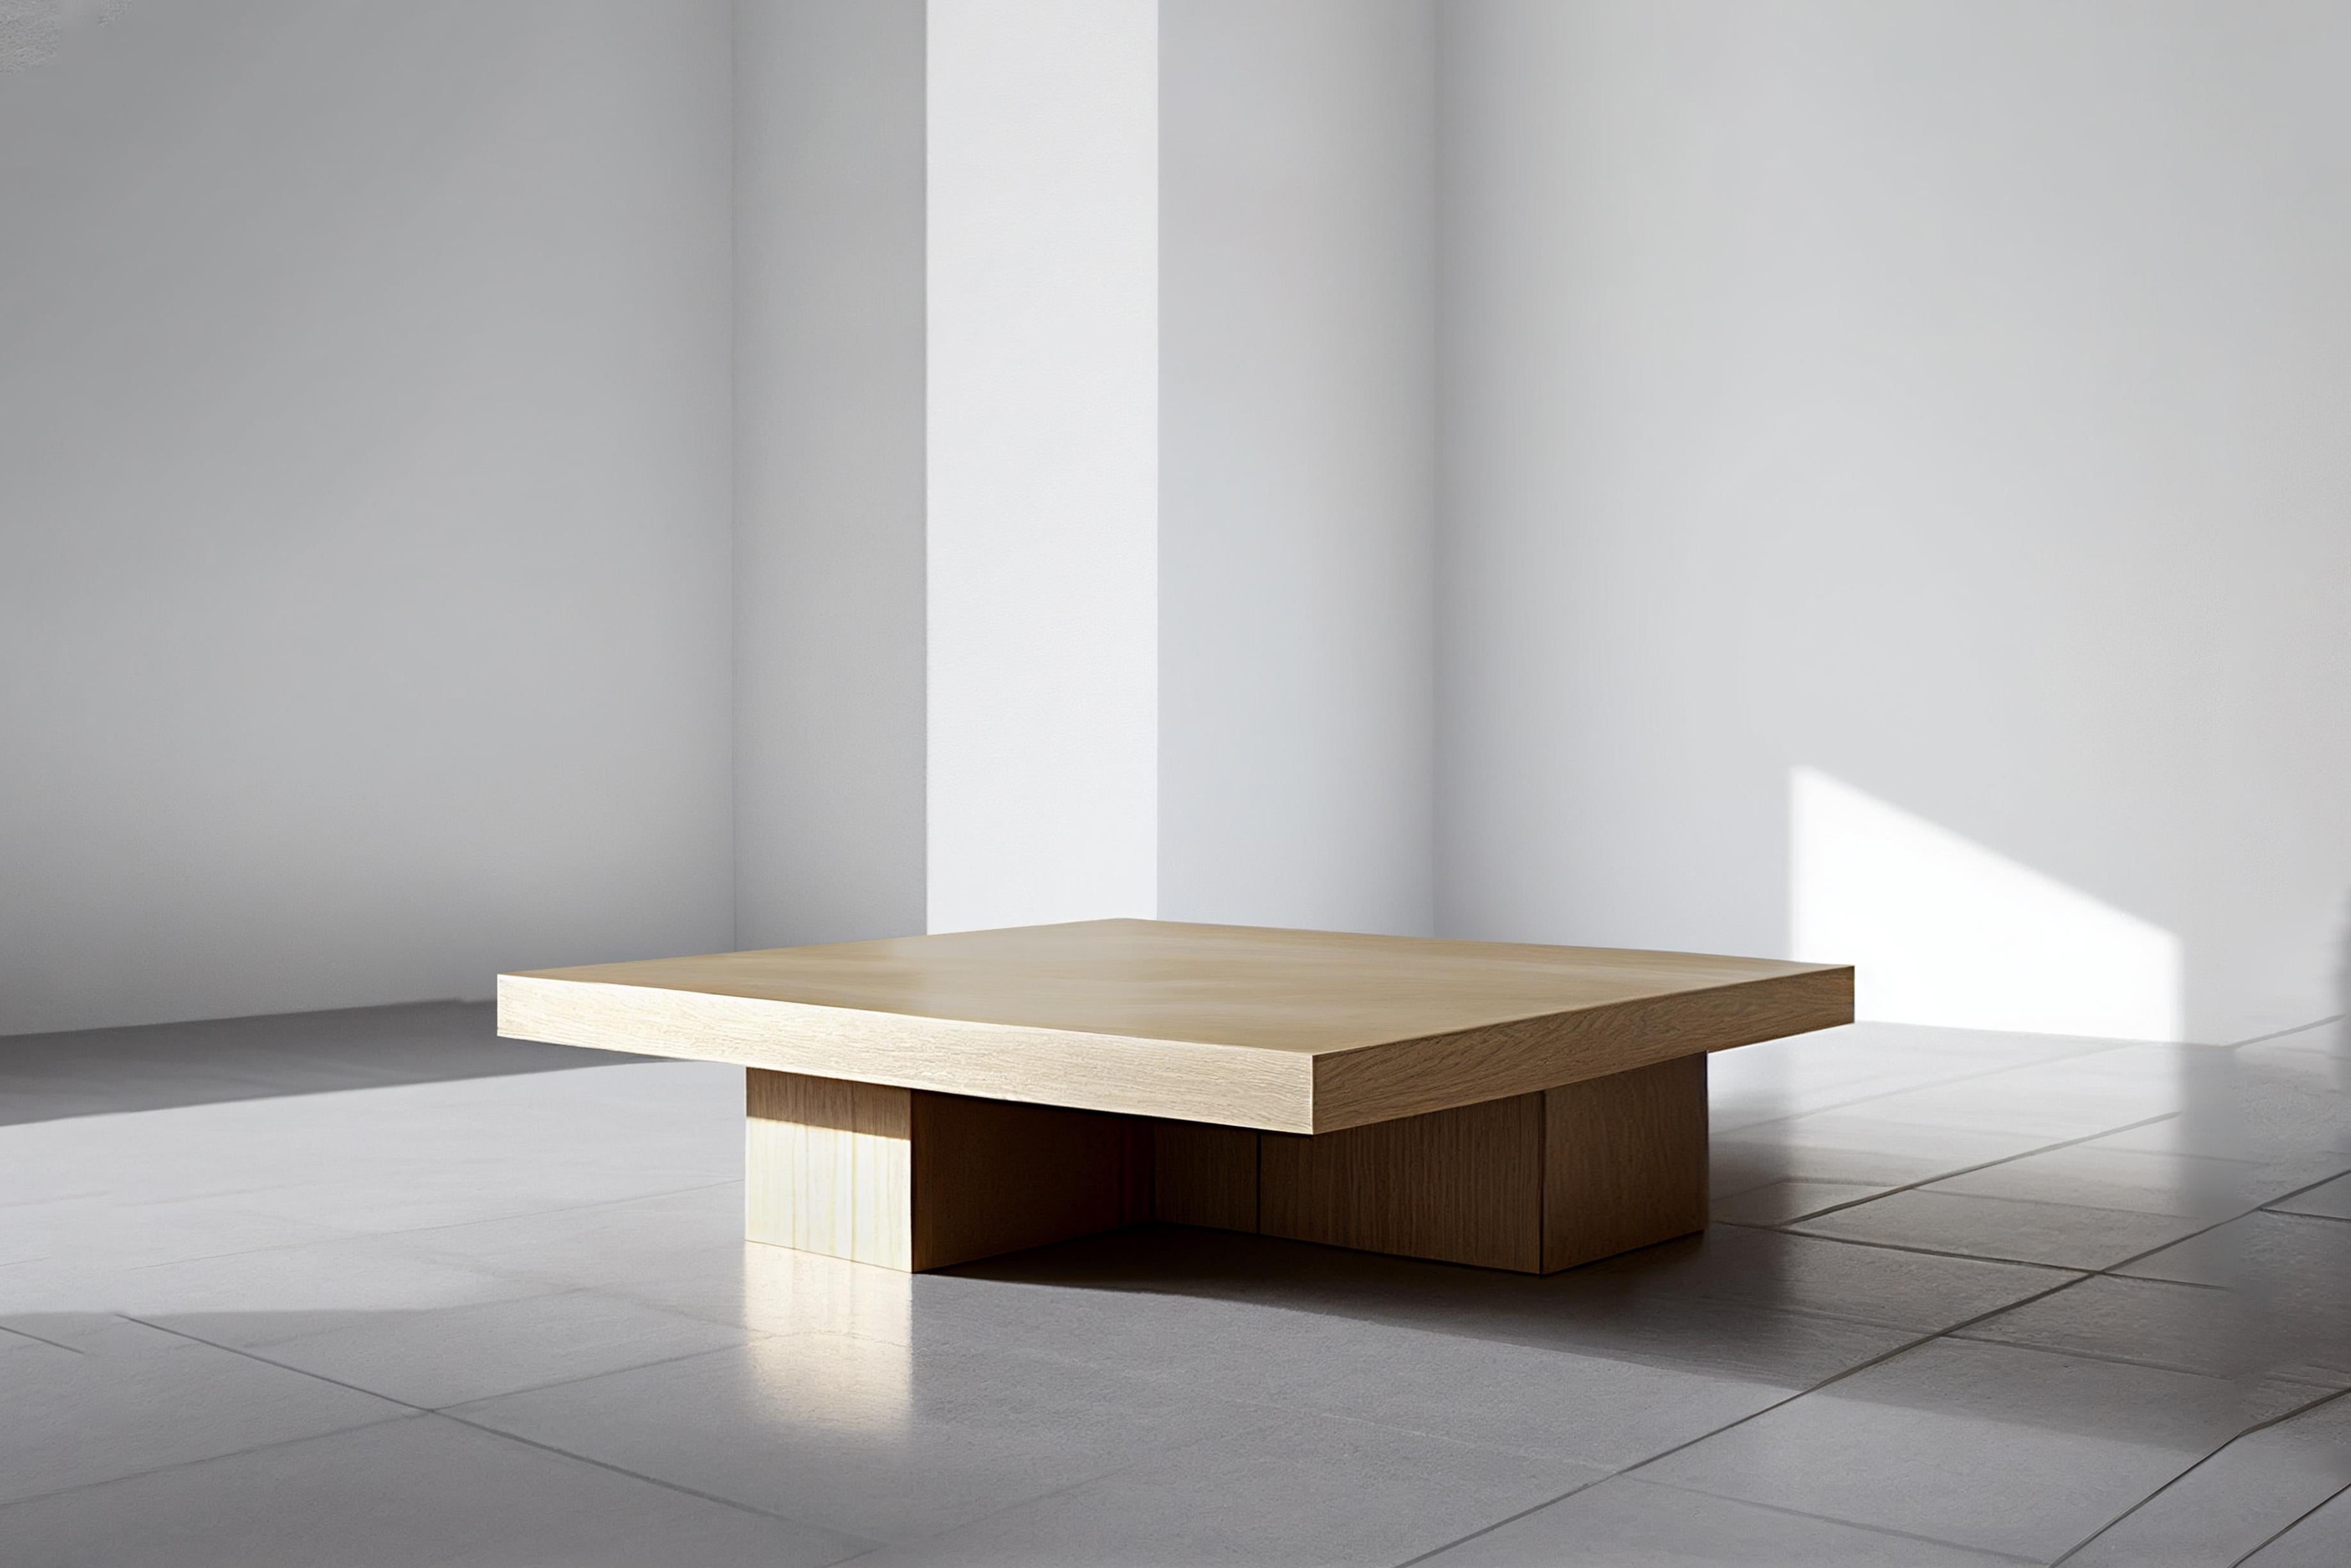 Coffee table made with a top quality mdf structure with a beautiful wood veneer finish. All the pieces are coated with polyurethane with a semi-matt finish.
—
NONO is a Mexican design brand with more than 10 years of experience dedicated to the